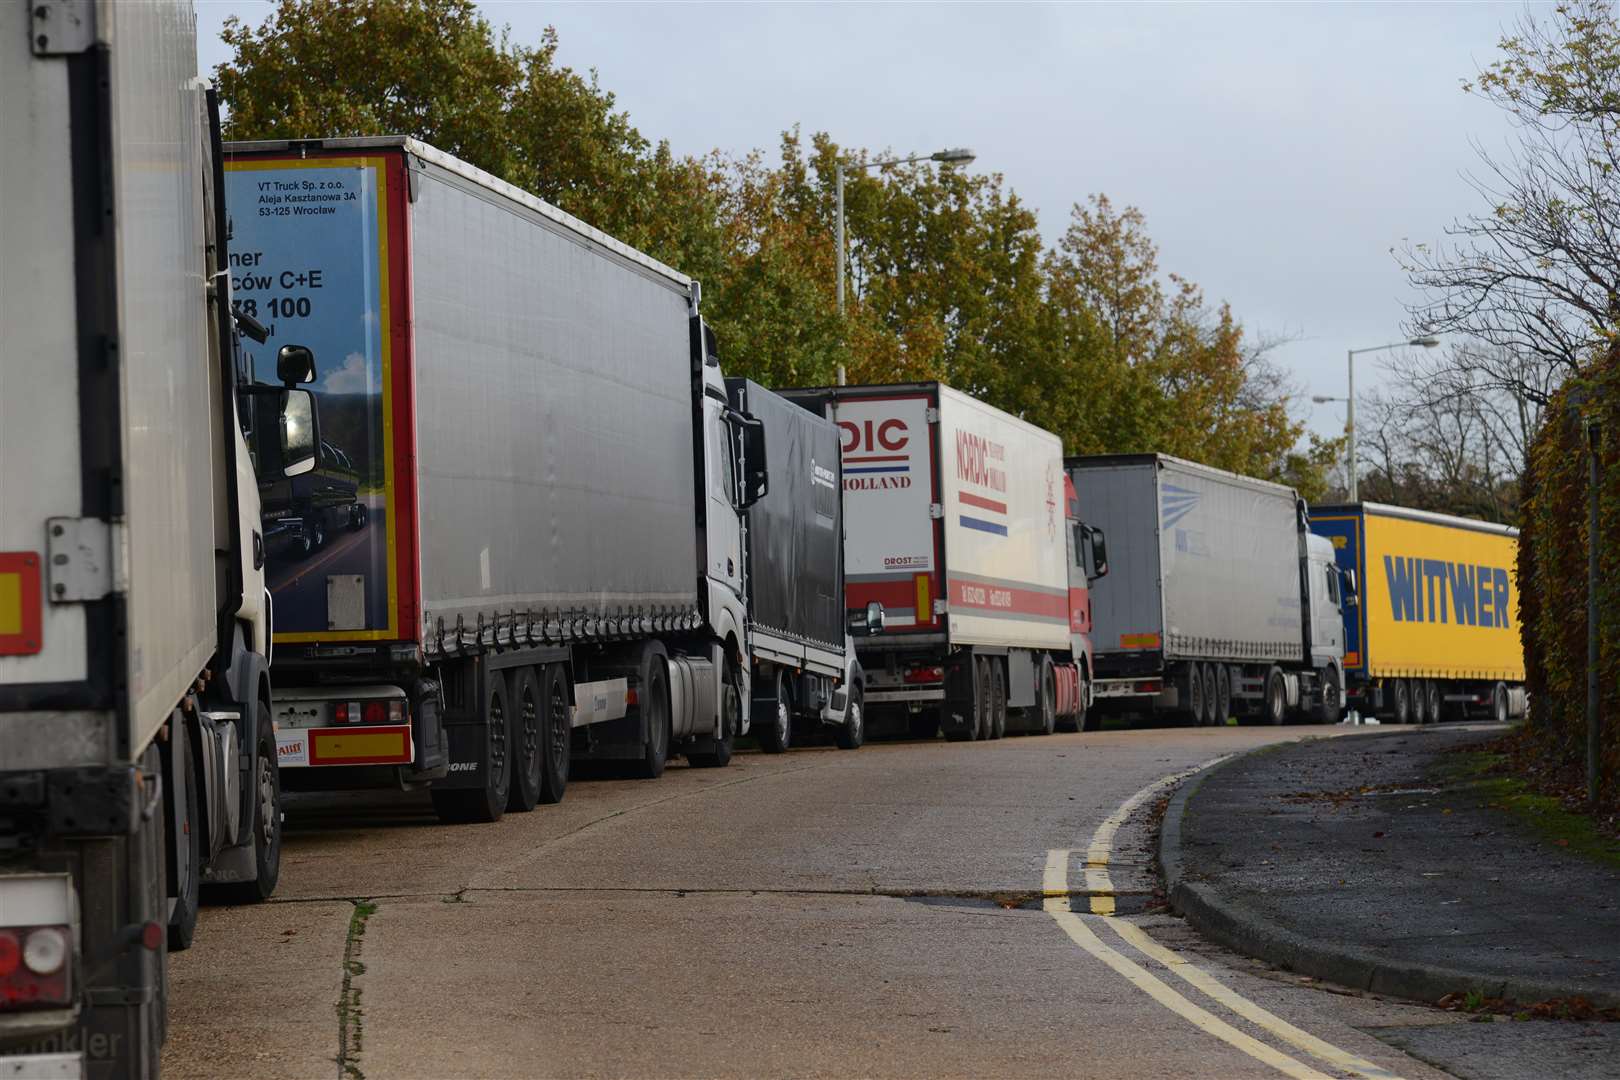 Lorries parking overnight has long been a problem in Ashford